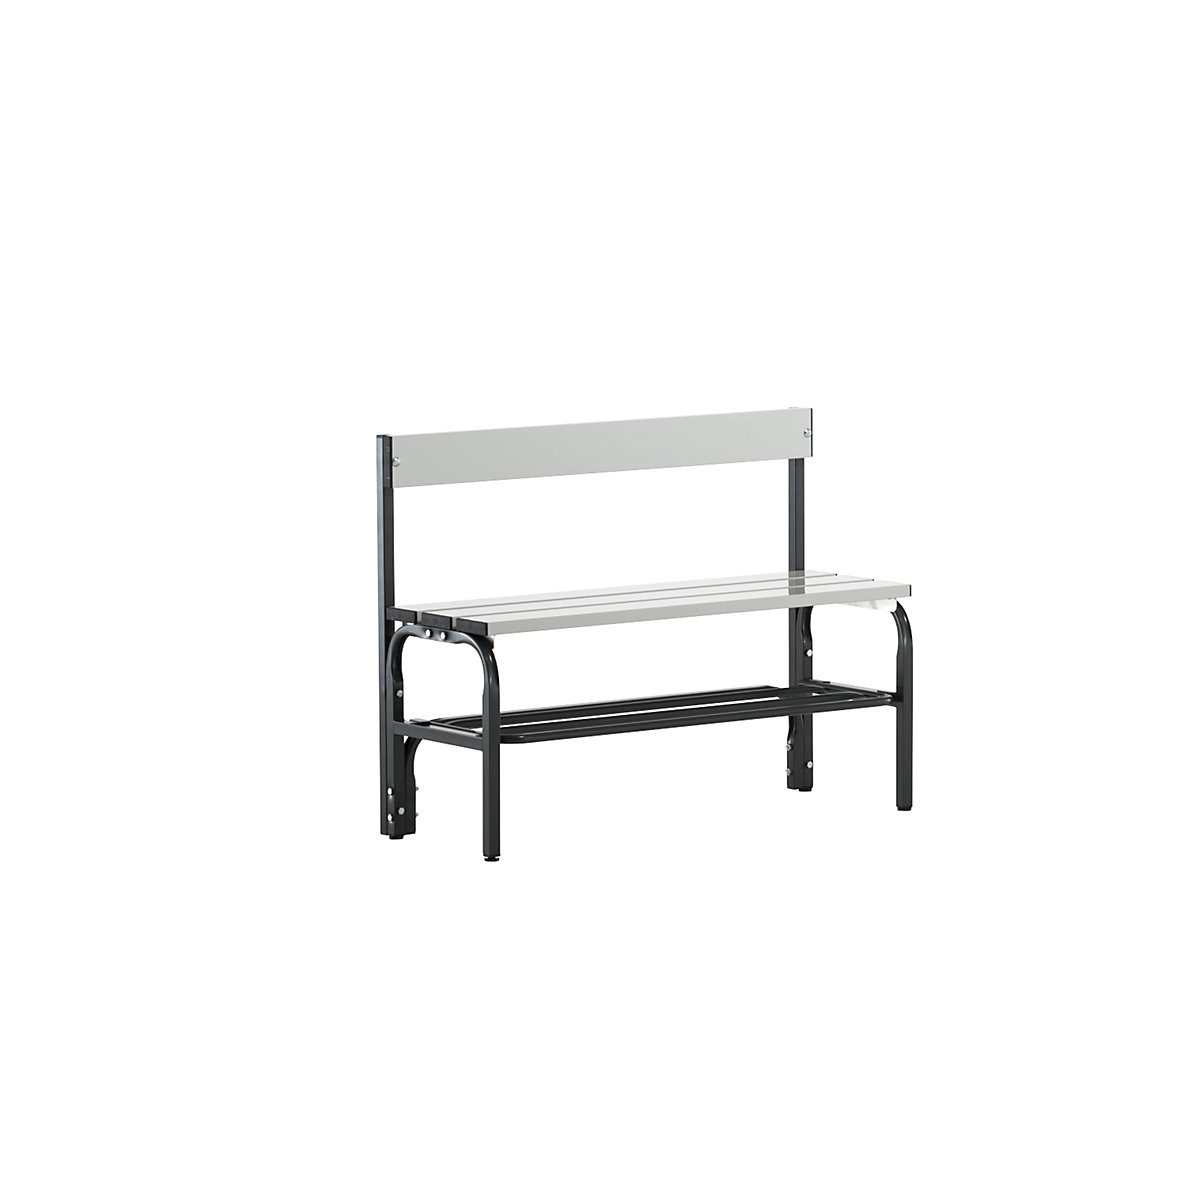 Sypro – Half height cloakroom bench with back rest, single-sided, aluminium, length 1015 mm, charcoal, shoe rack